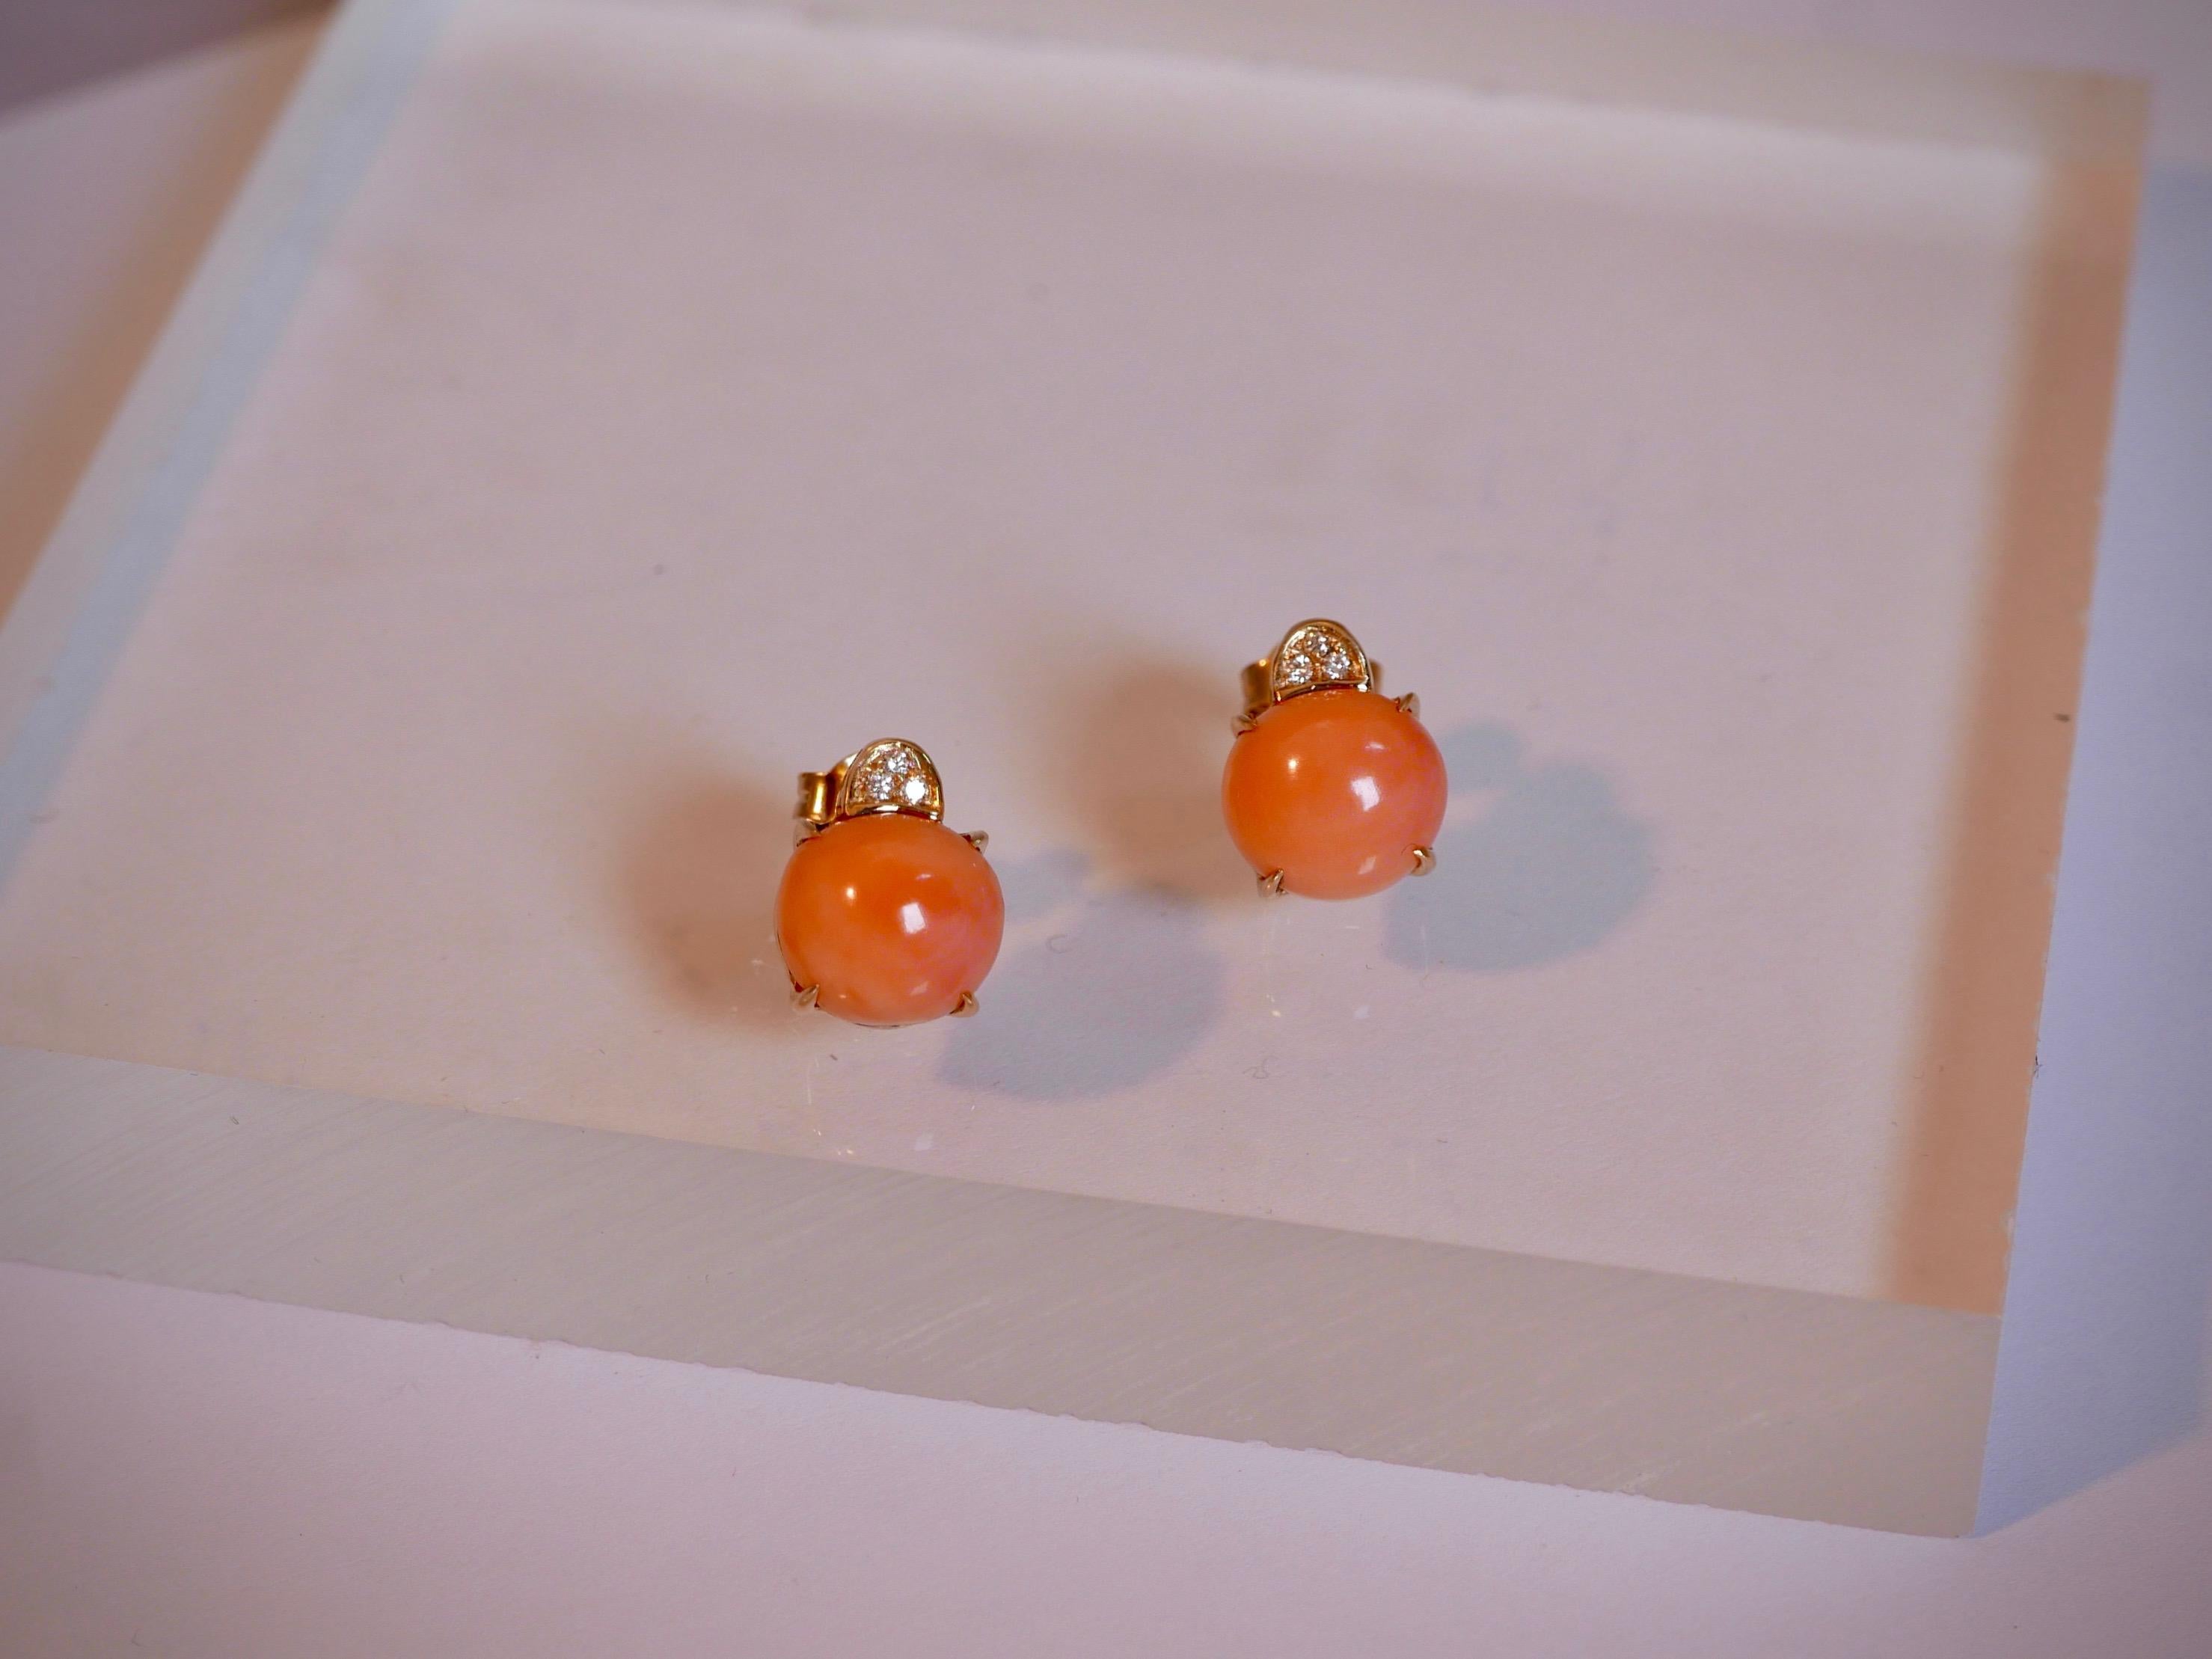 2 Handcut Coral stones (8,70ct)
Set with 6 White Diamonds (0,06ct) 
Set in 18kt White Gold
Made in Italy

These dainty earrings have been handmade in our 150 year old workshop in Italy. Our fifth generation goldsmith has cut them in house and set